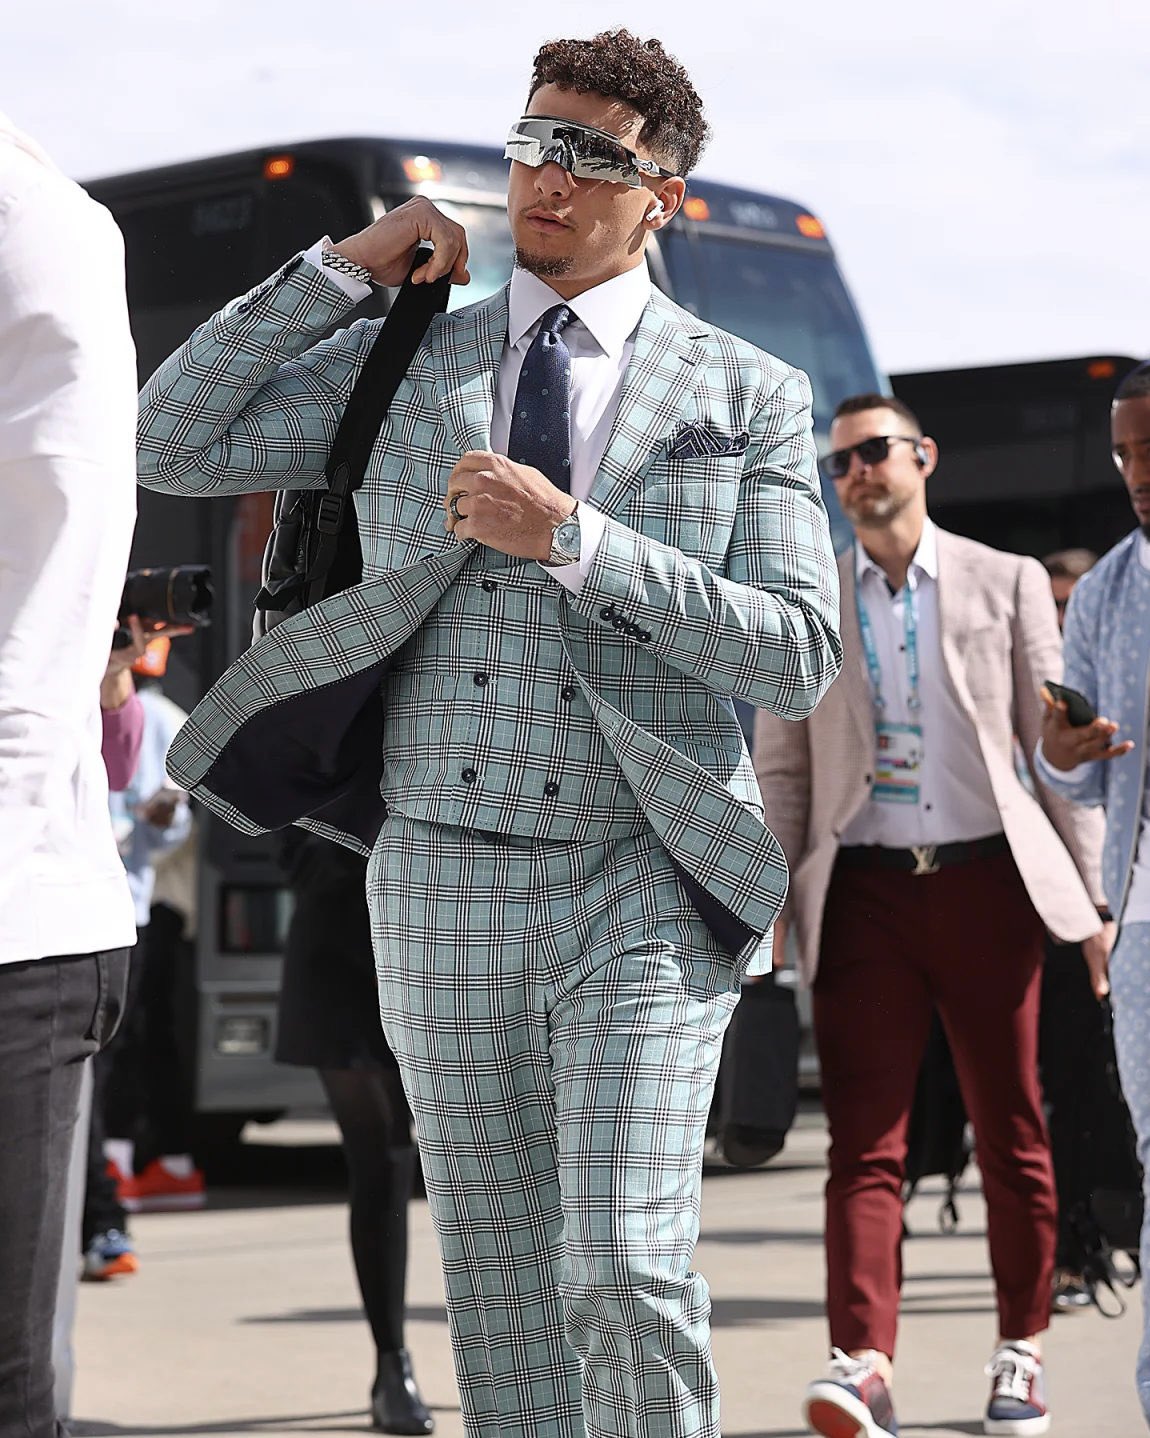 GQ Sports on X: Patrick Mahomes has arrived #chiefs #SuperBowl   / X